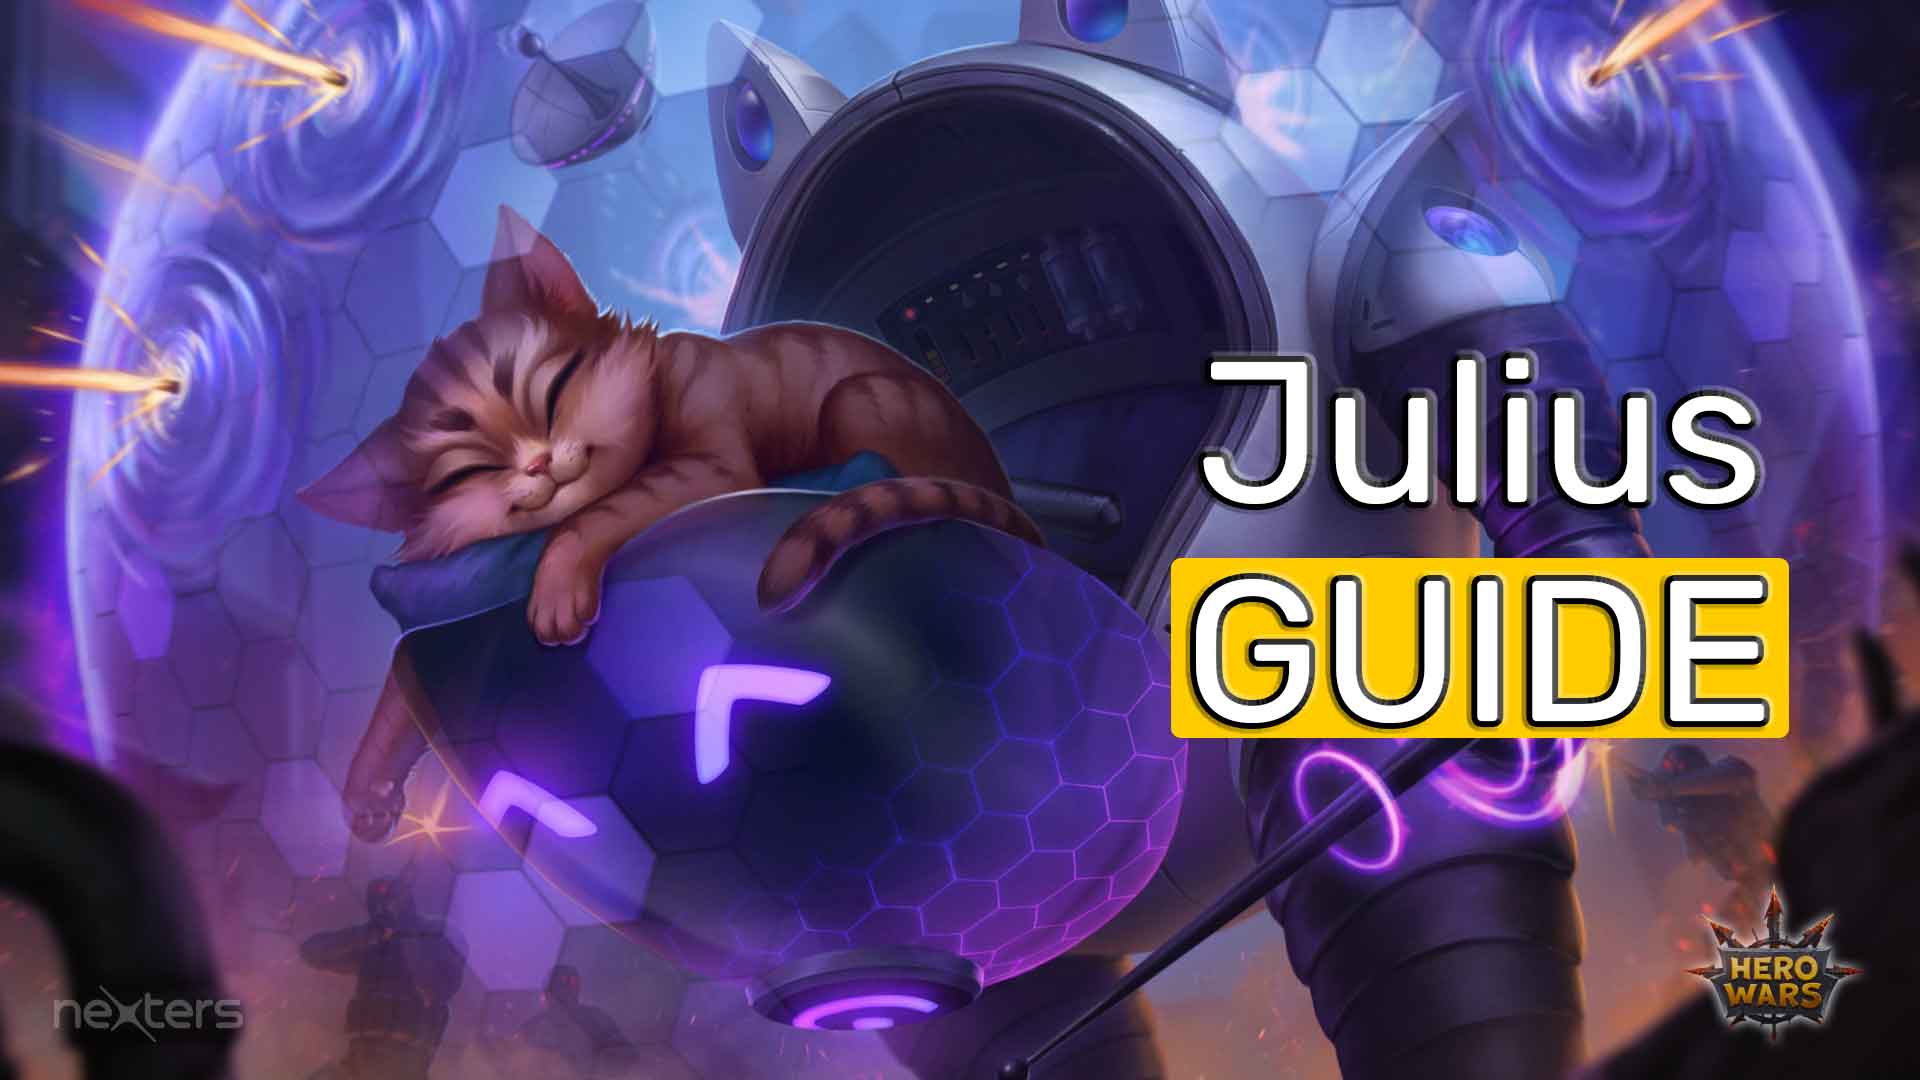 You are currently viewing Hero Wars Julius Guide